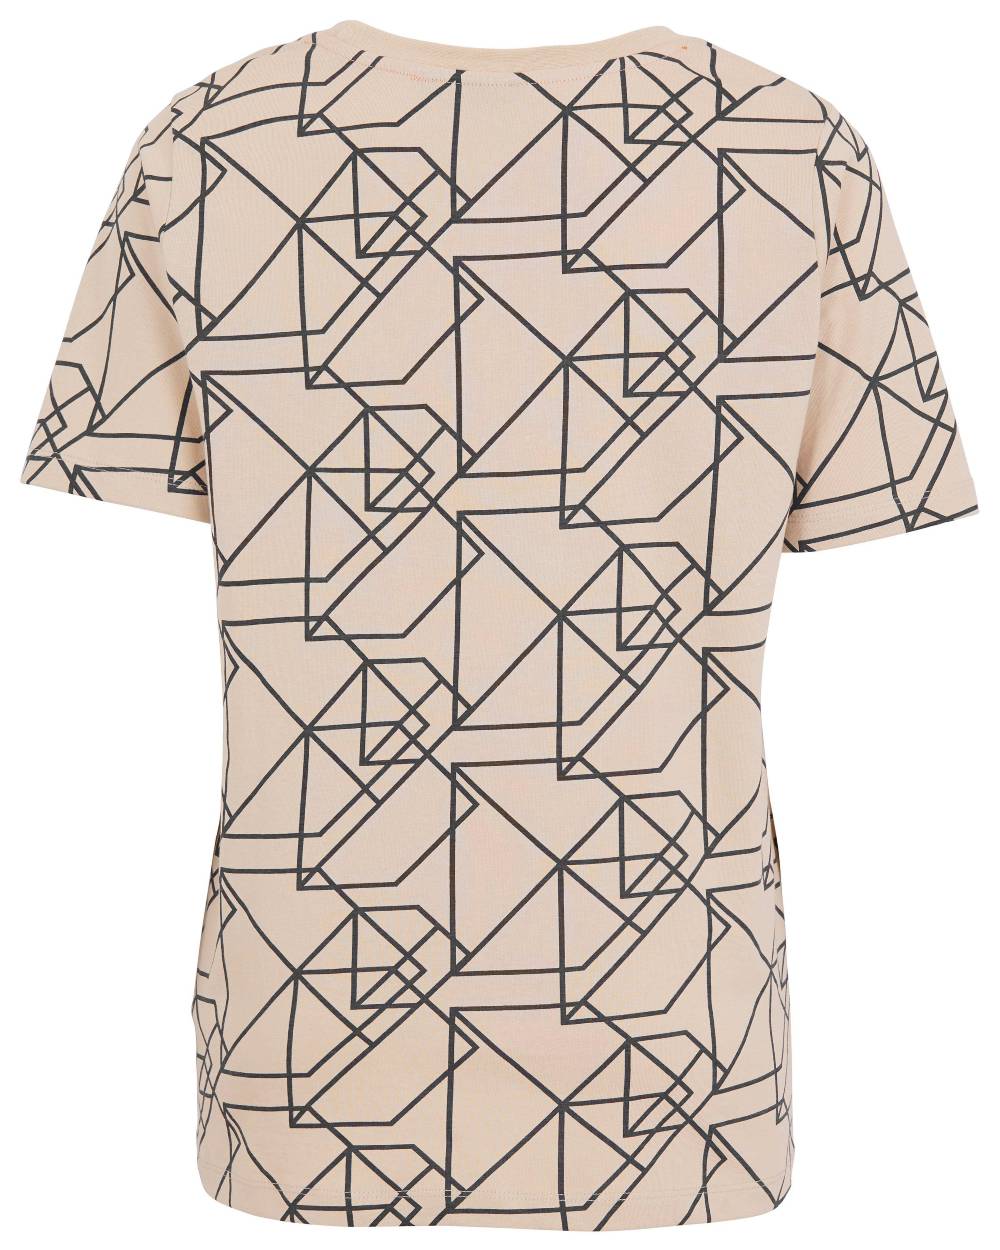 Light Beige/Coal Black Coloured Didriksons Unni Womens Printed T-Shirt On A White Background 